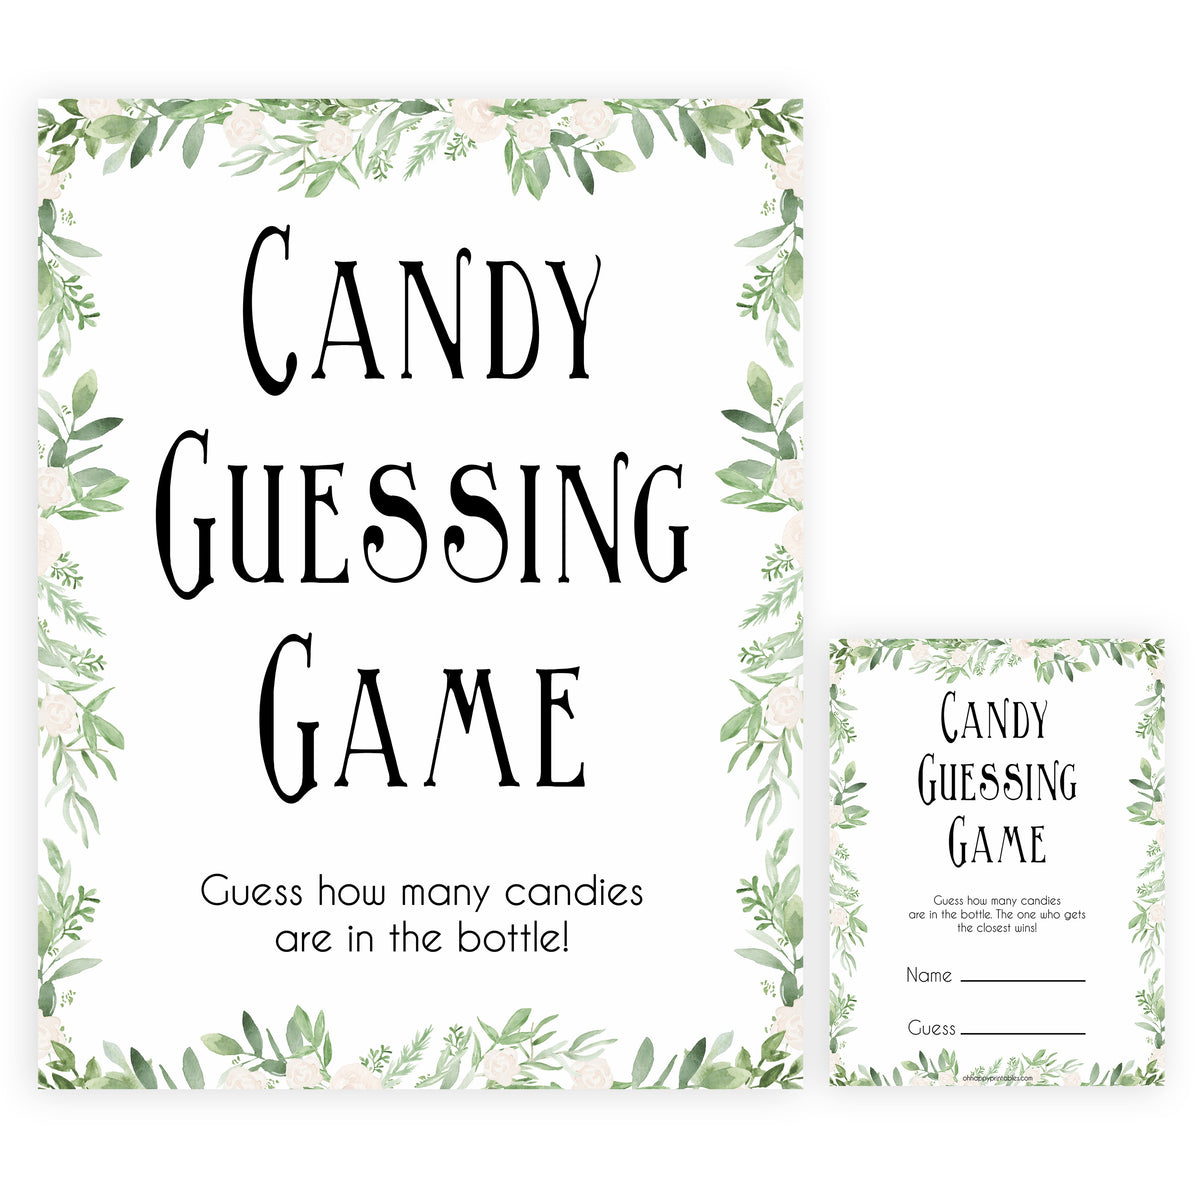 Candy Guessing Game Template Free